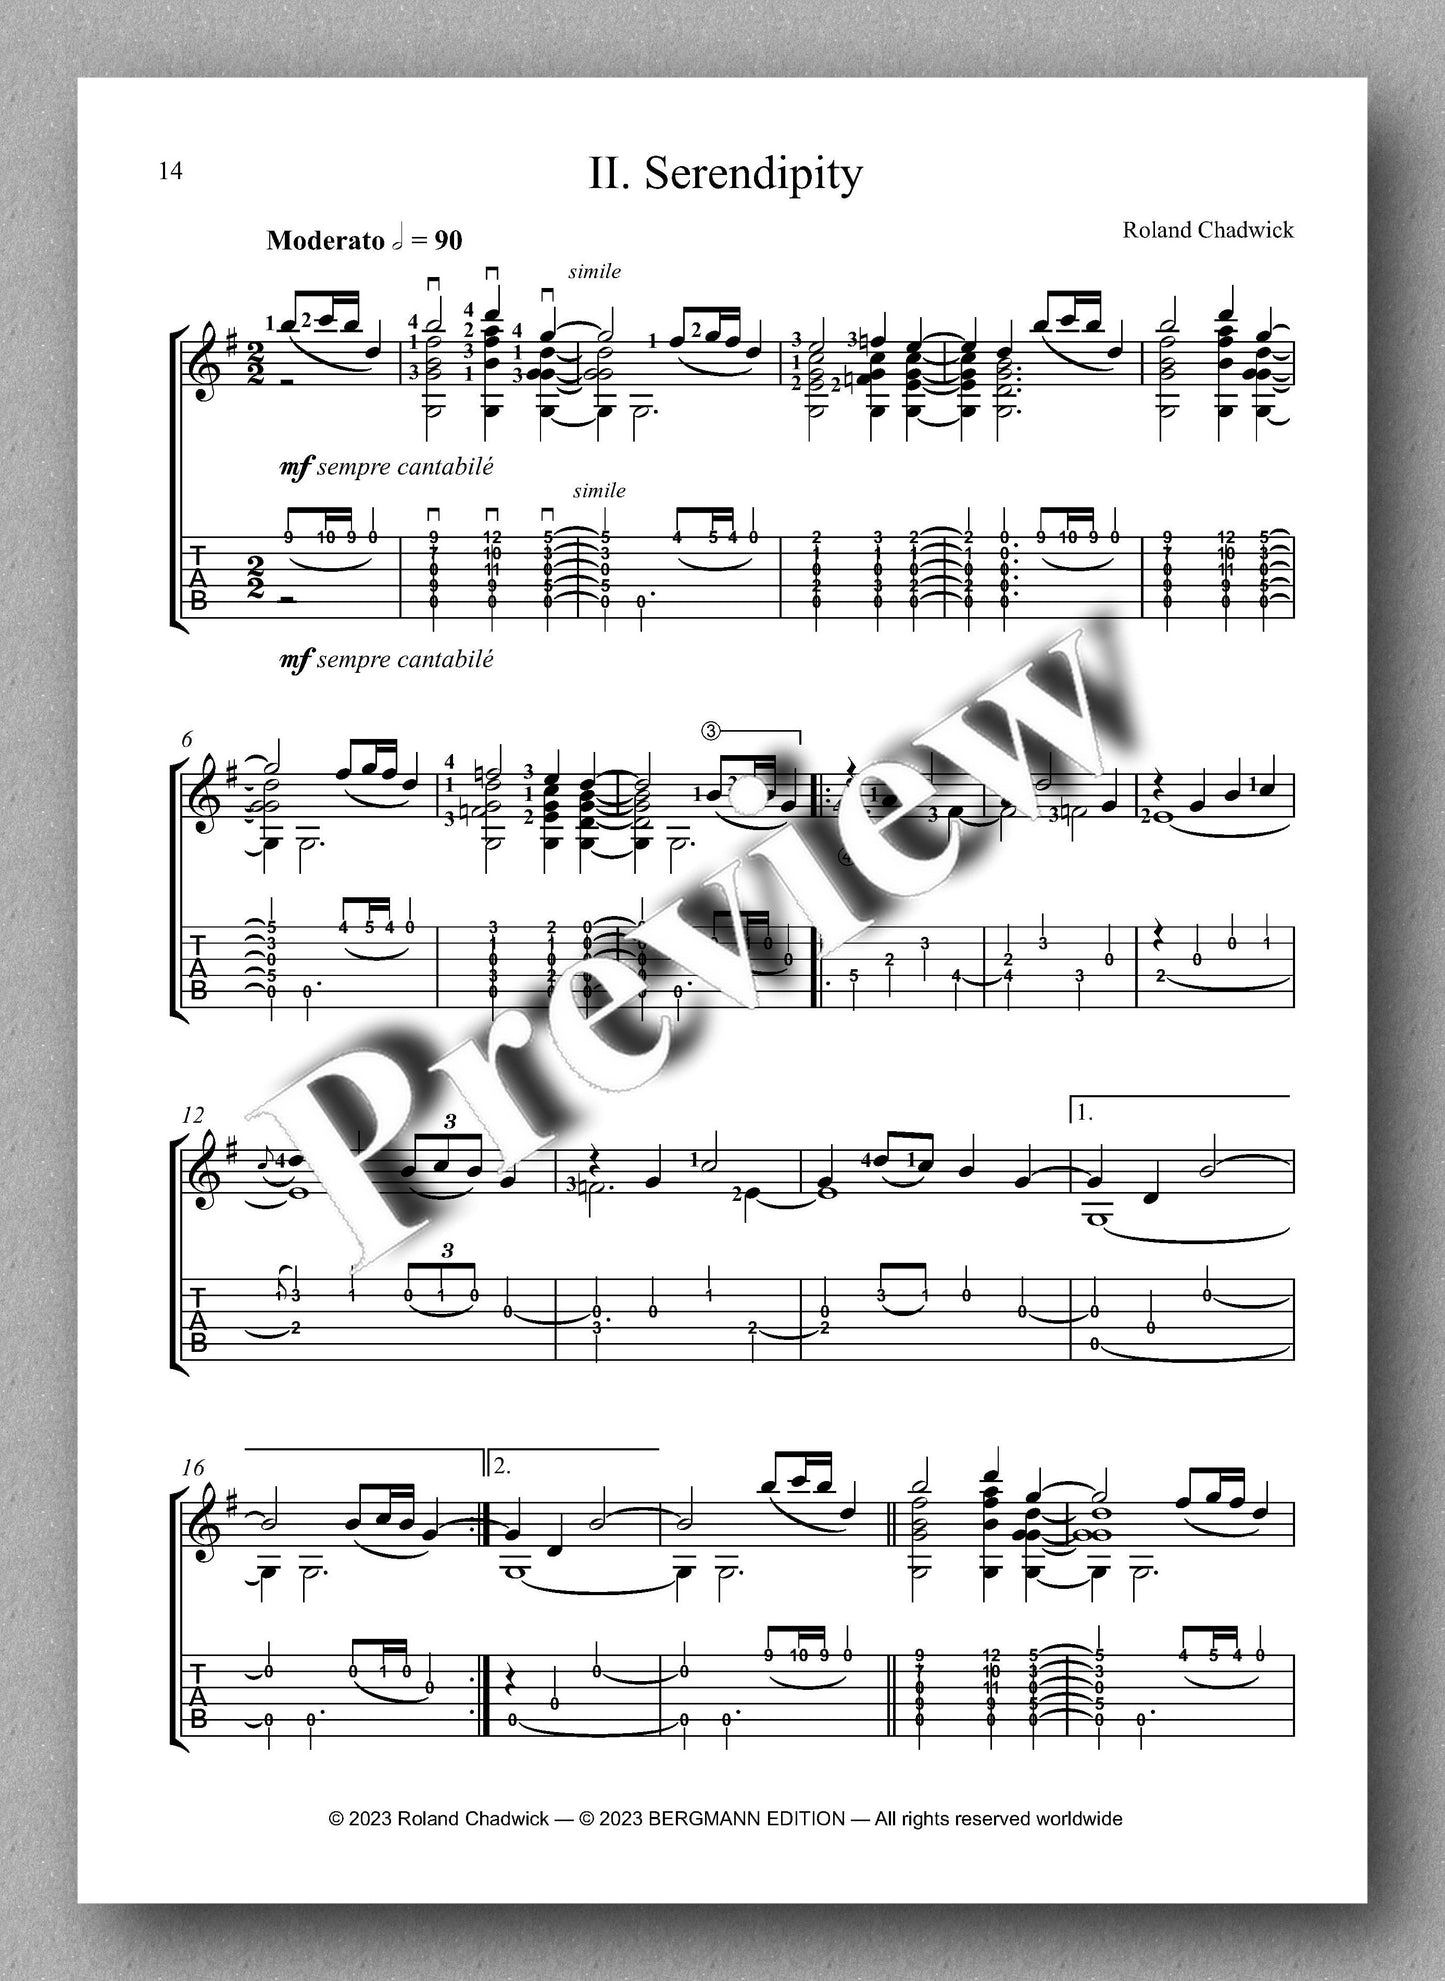 Roland Chadwick, Carabella Suite - preview of the music score 2